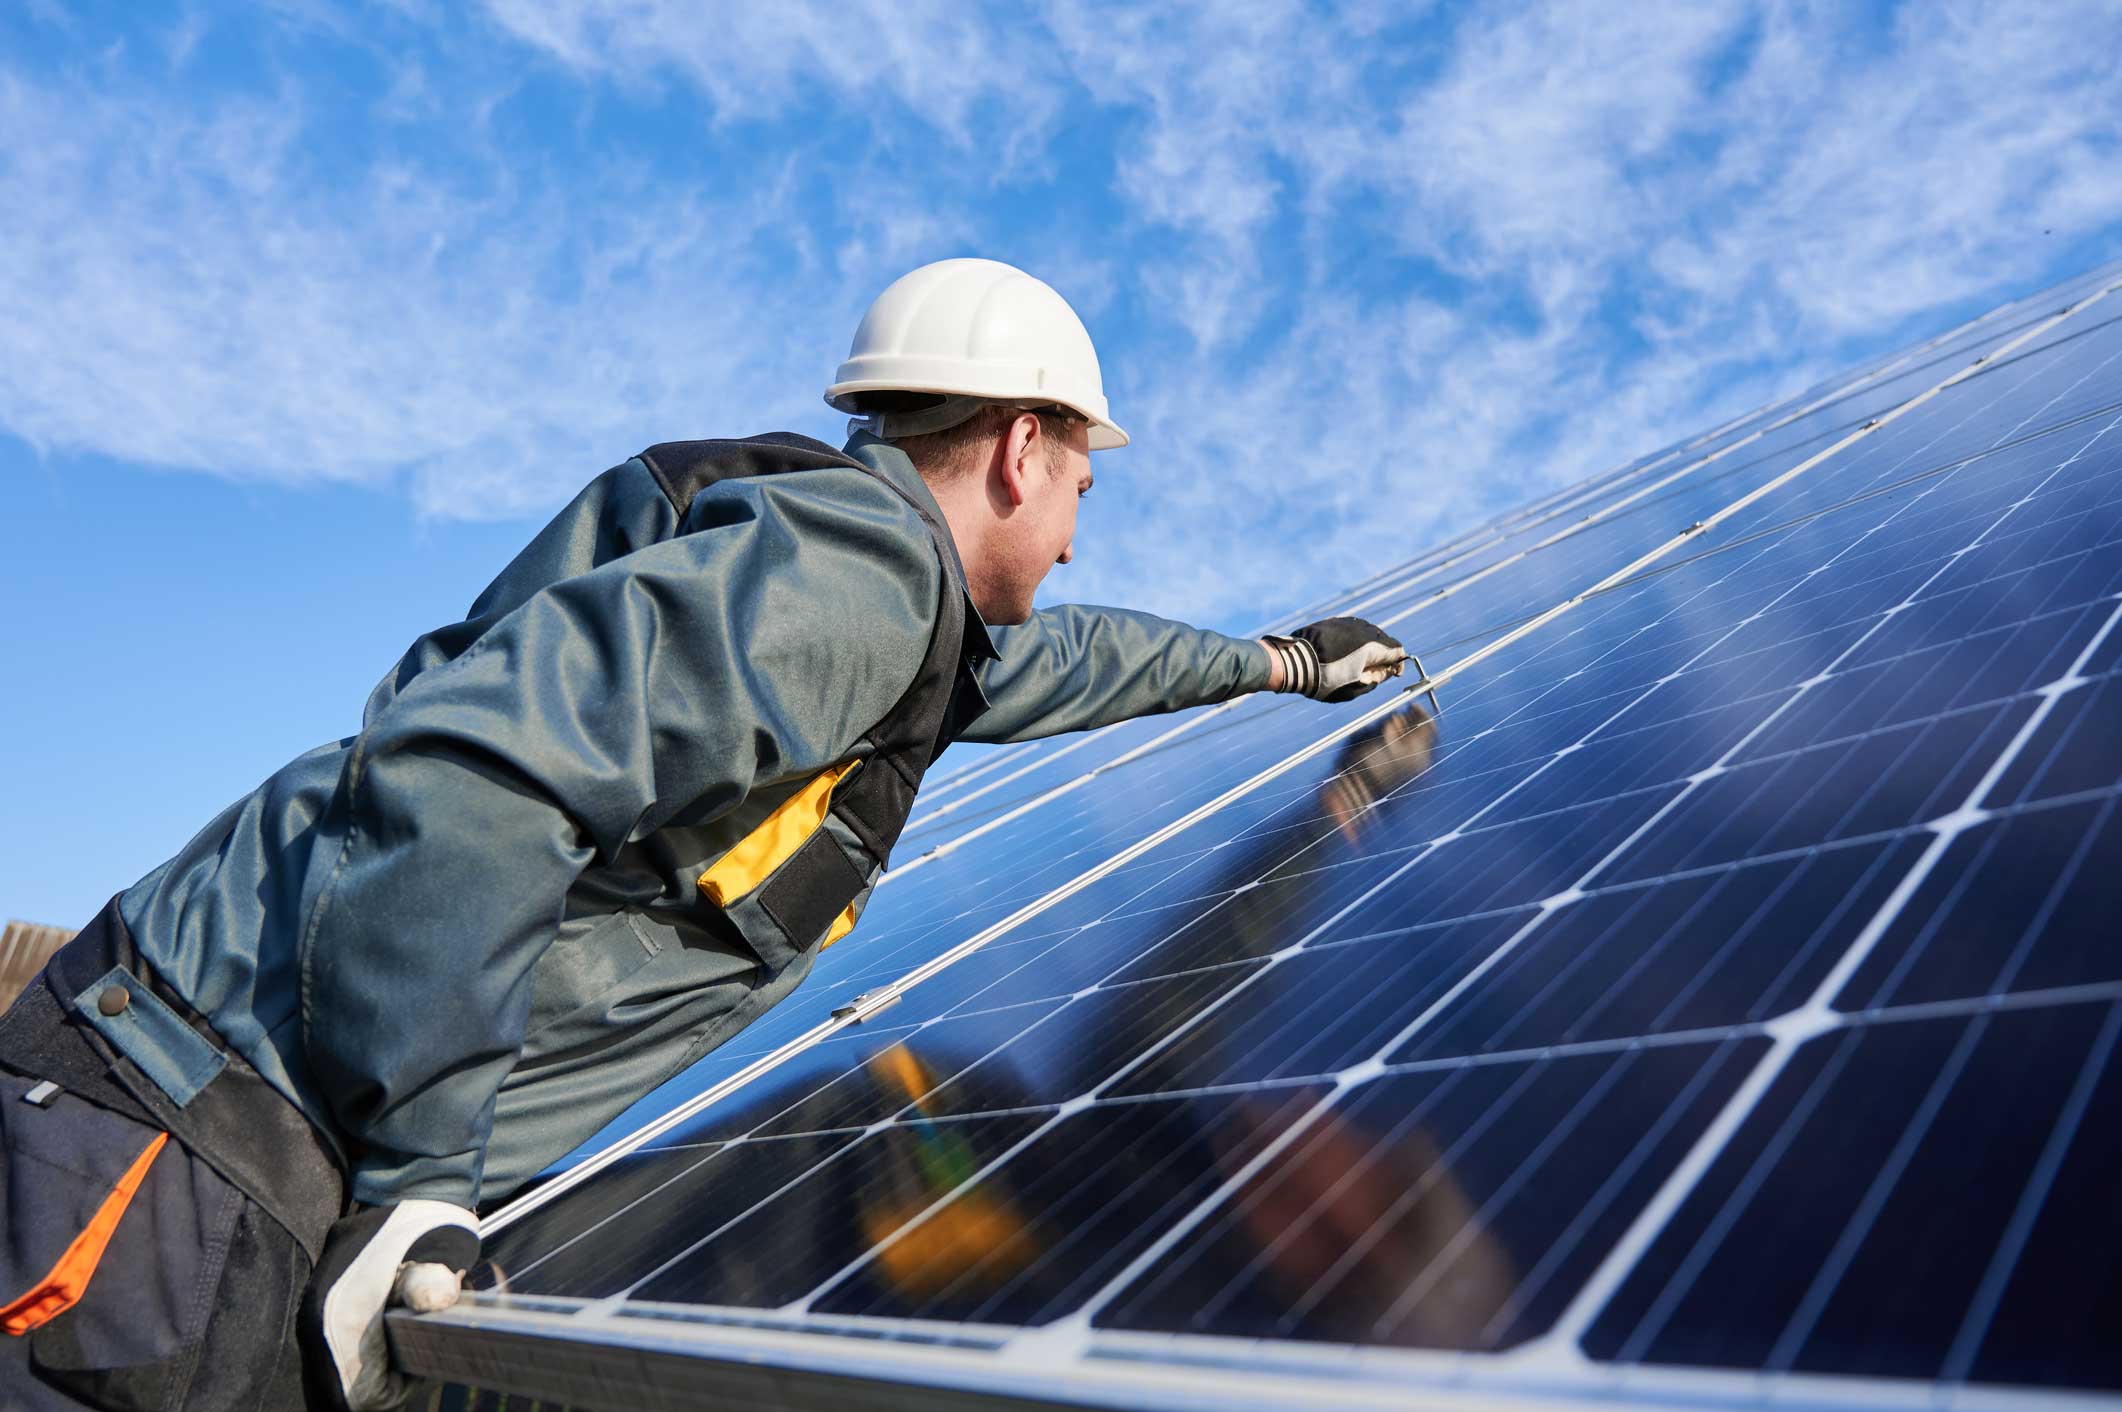 Connect with a solar expert